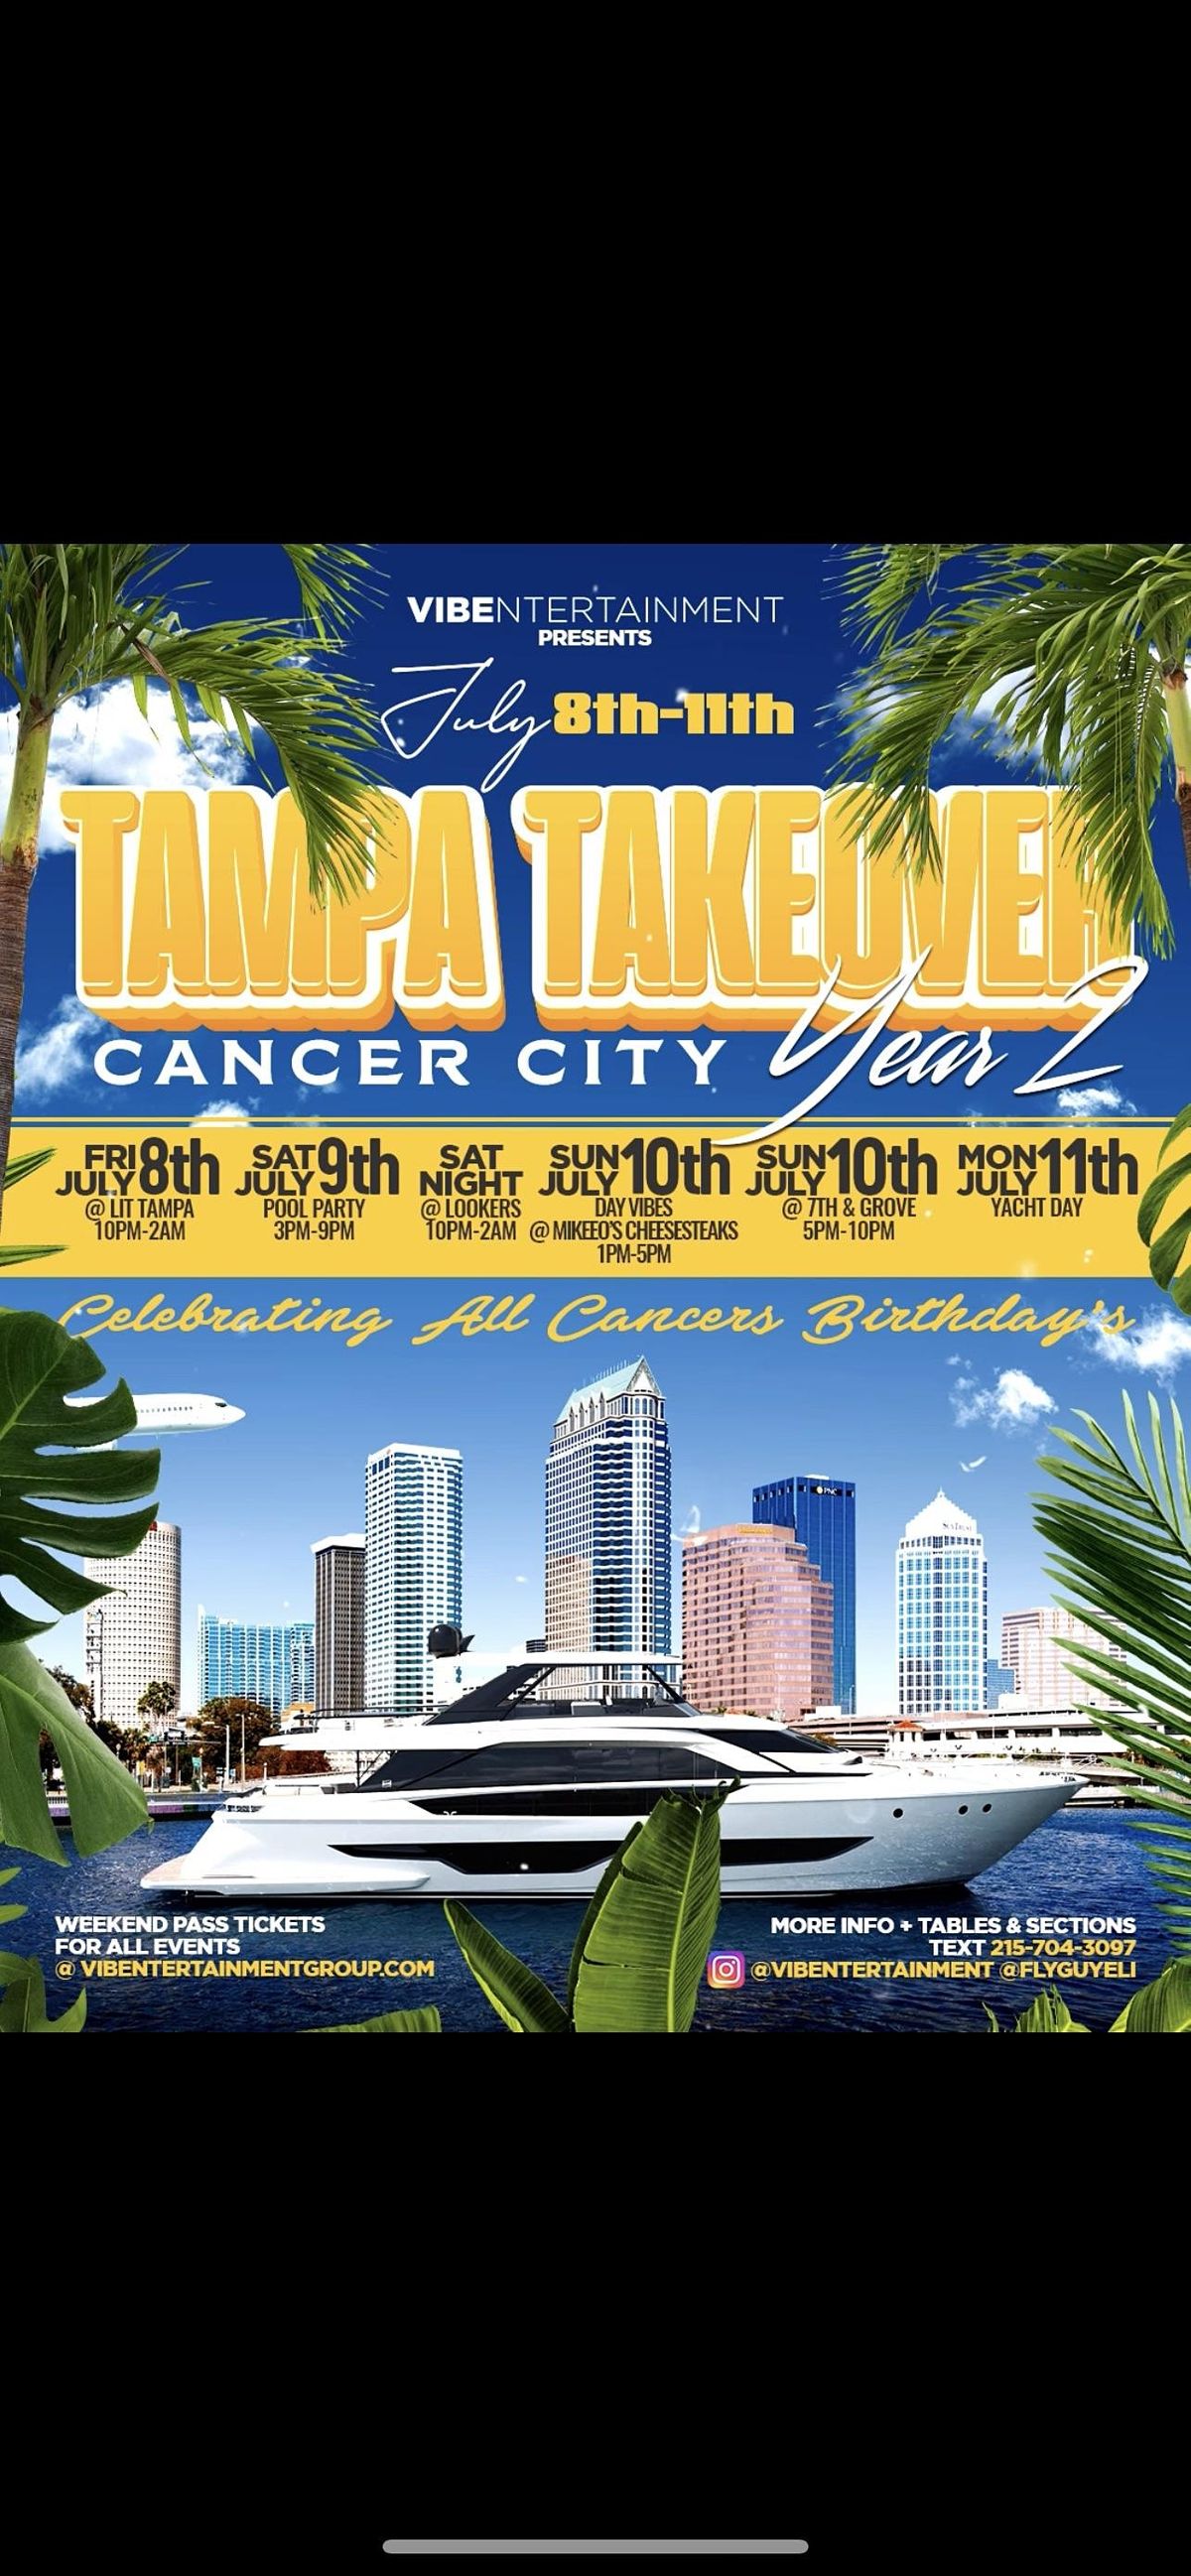 Tampa Takeover "CANCER CITY" year 2